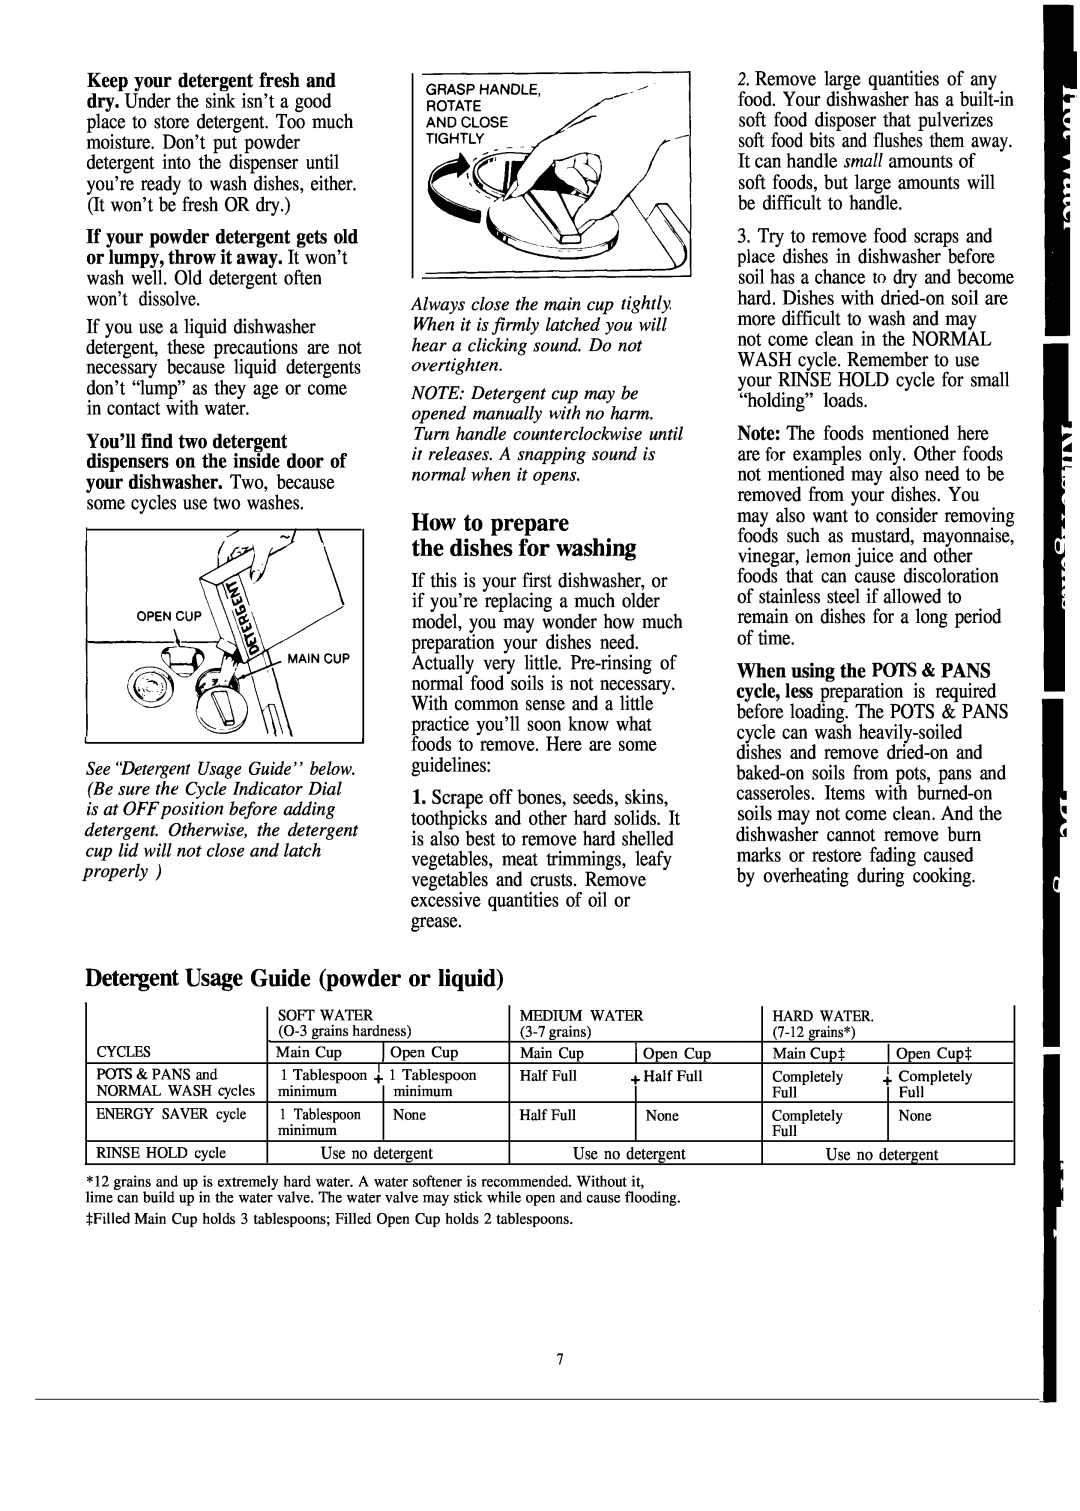 Hotpoint HDA1OOOK manual How to prepare the dishes for washi~, Dete~ent UsWe Guide powder or liquid 